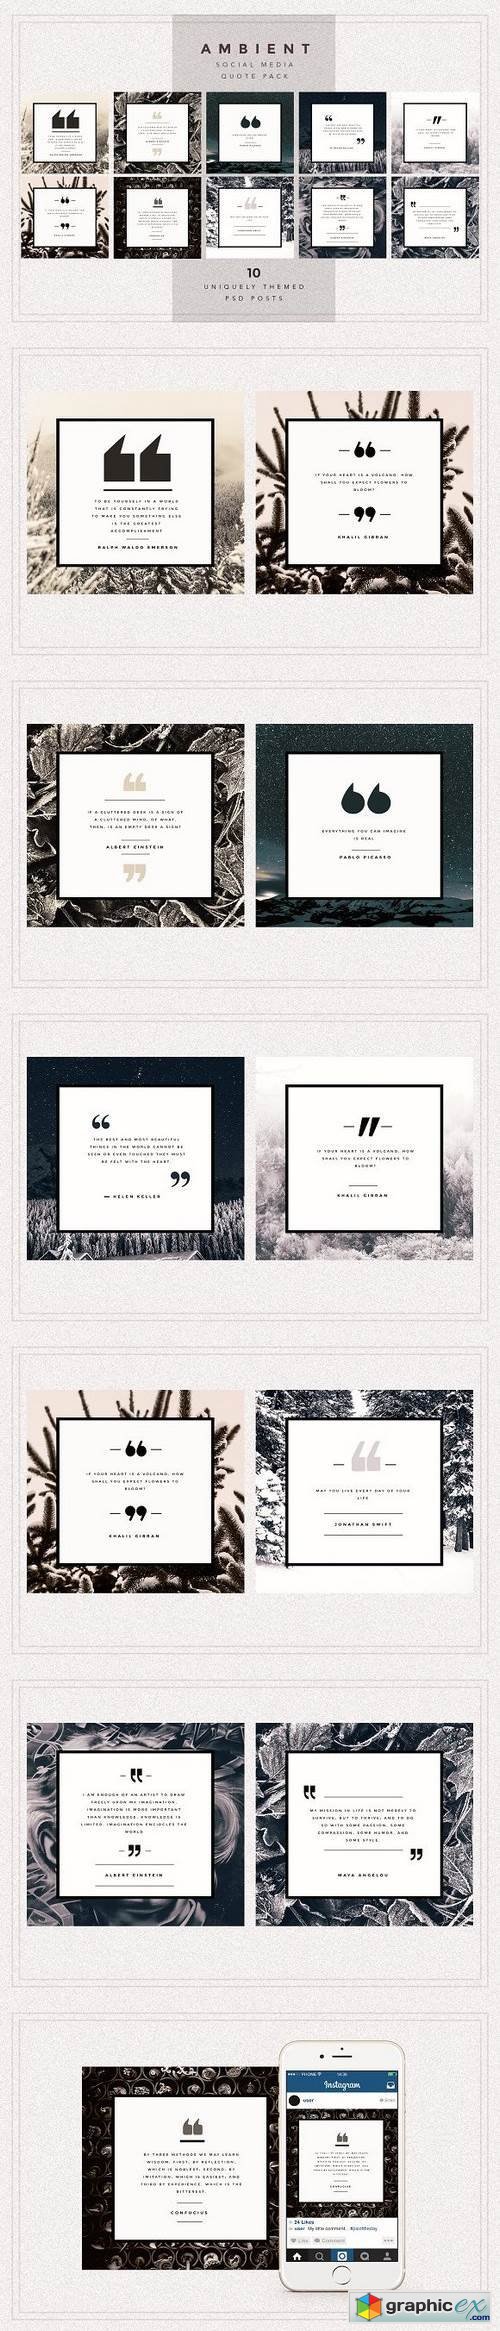 AMBIENT Social Media quote pack